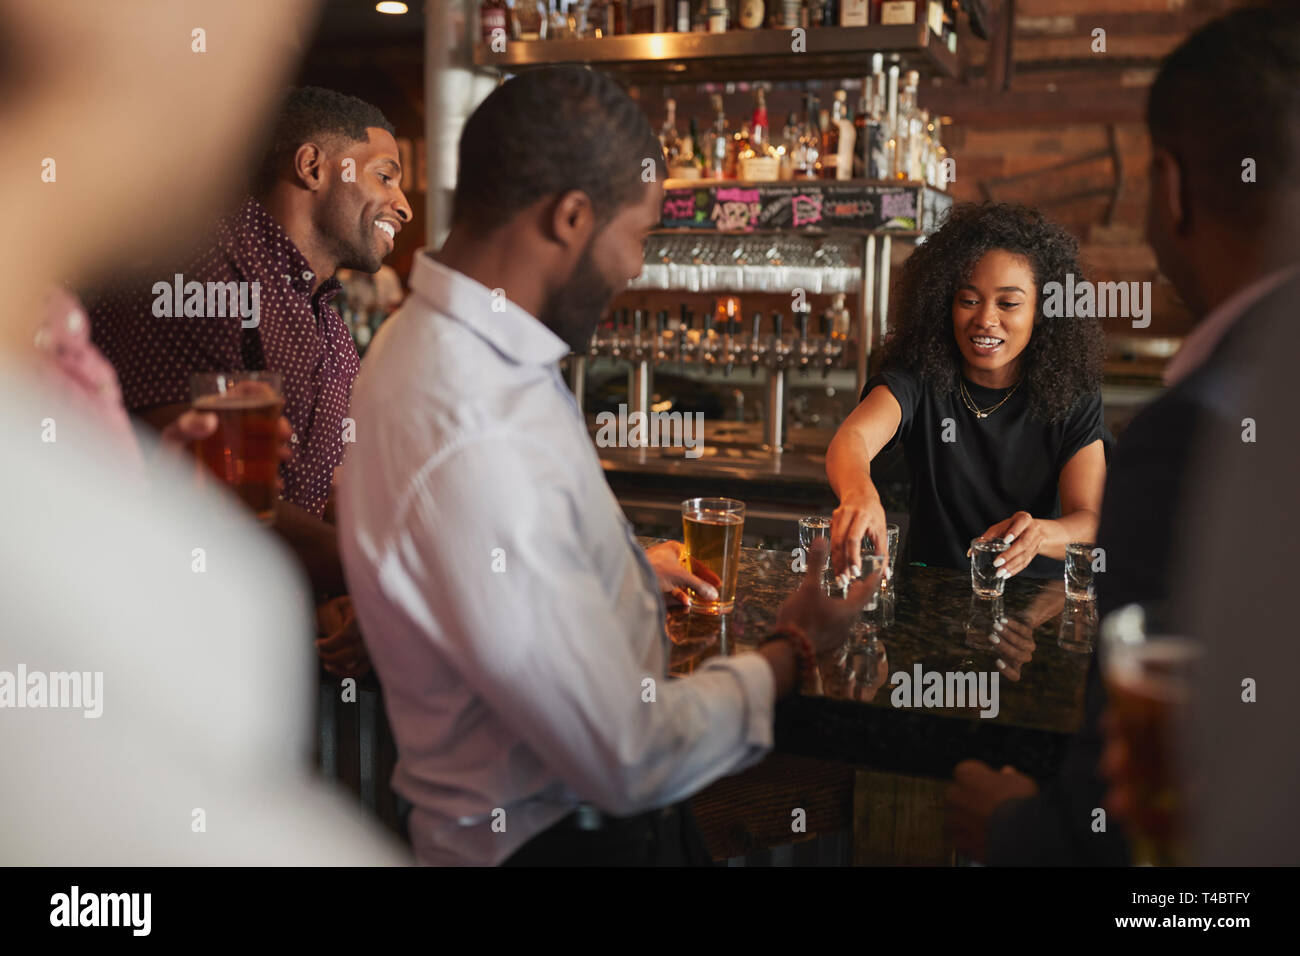 Barmaid Serving Shots To Group Of Male Friends On Night Out In Bar Stock Photo